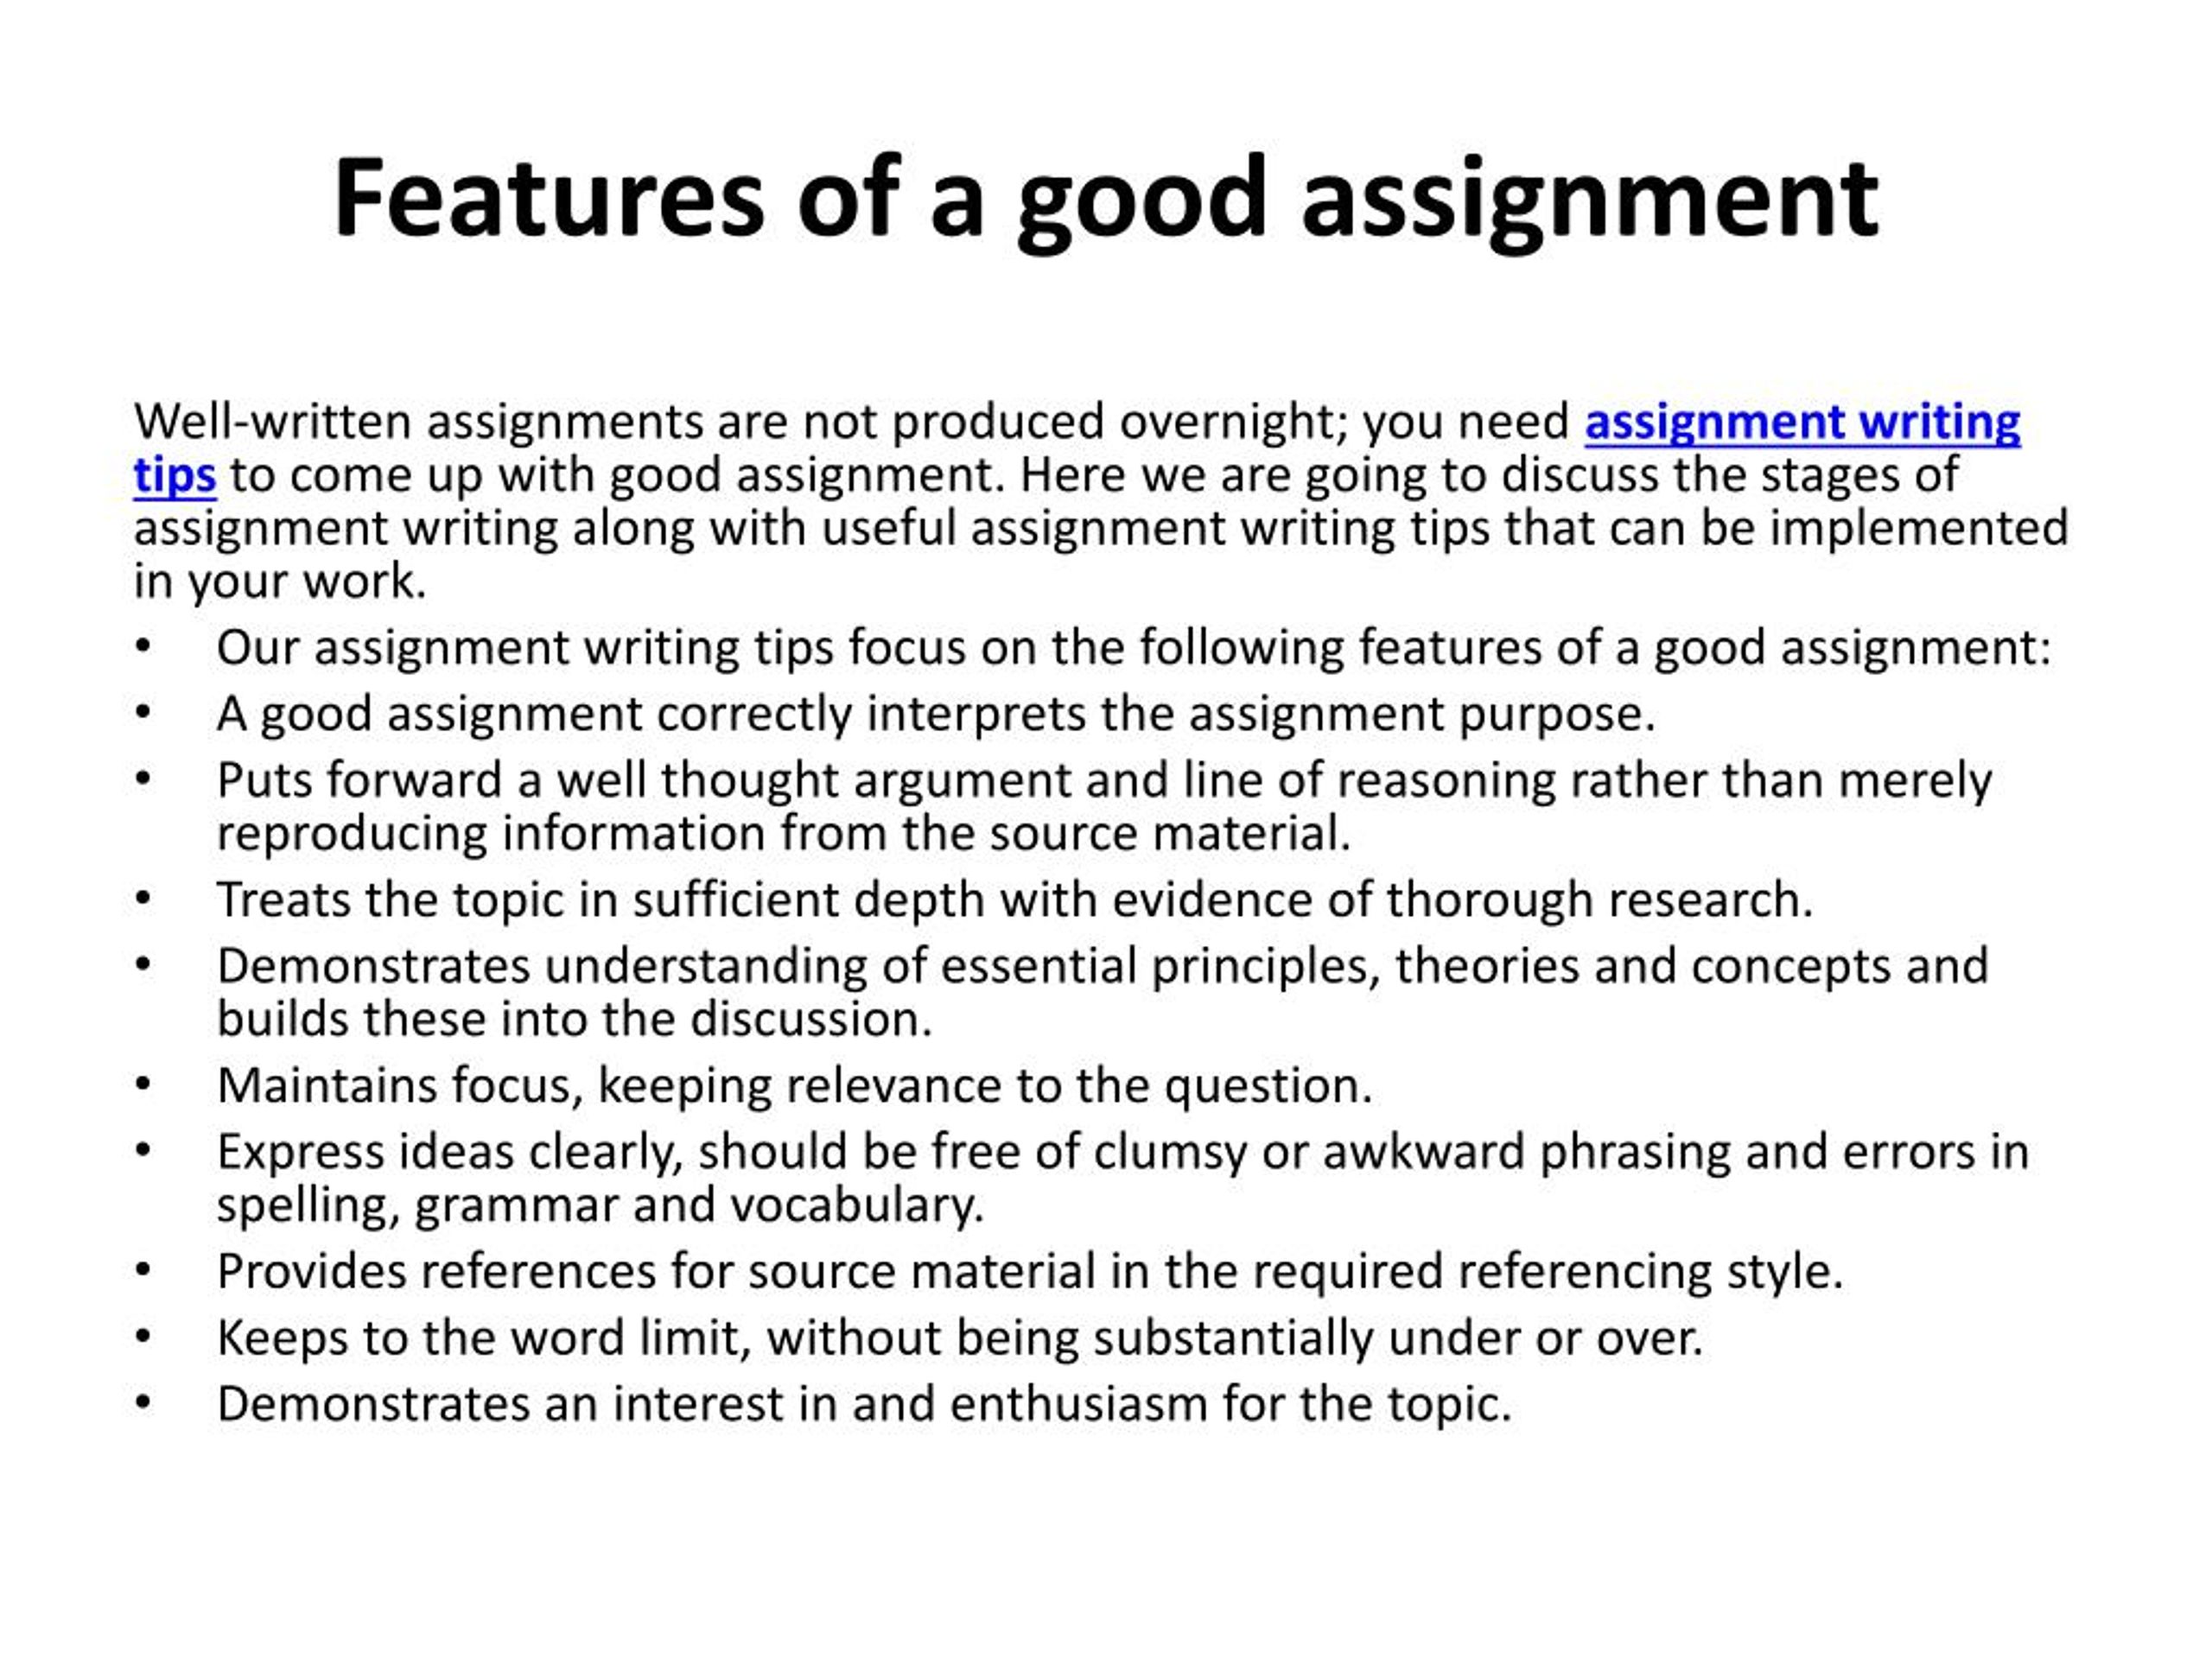 example of a good assignment